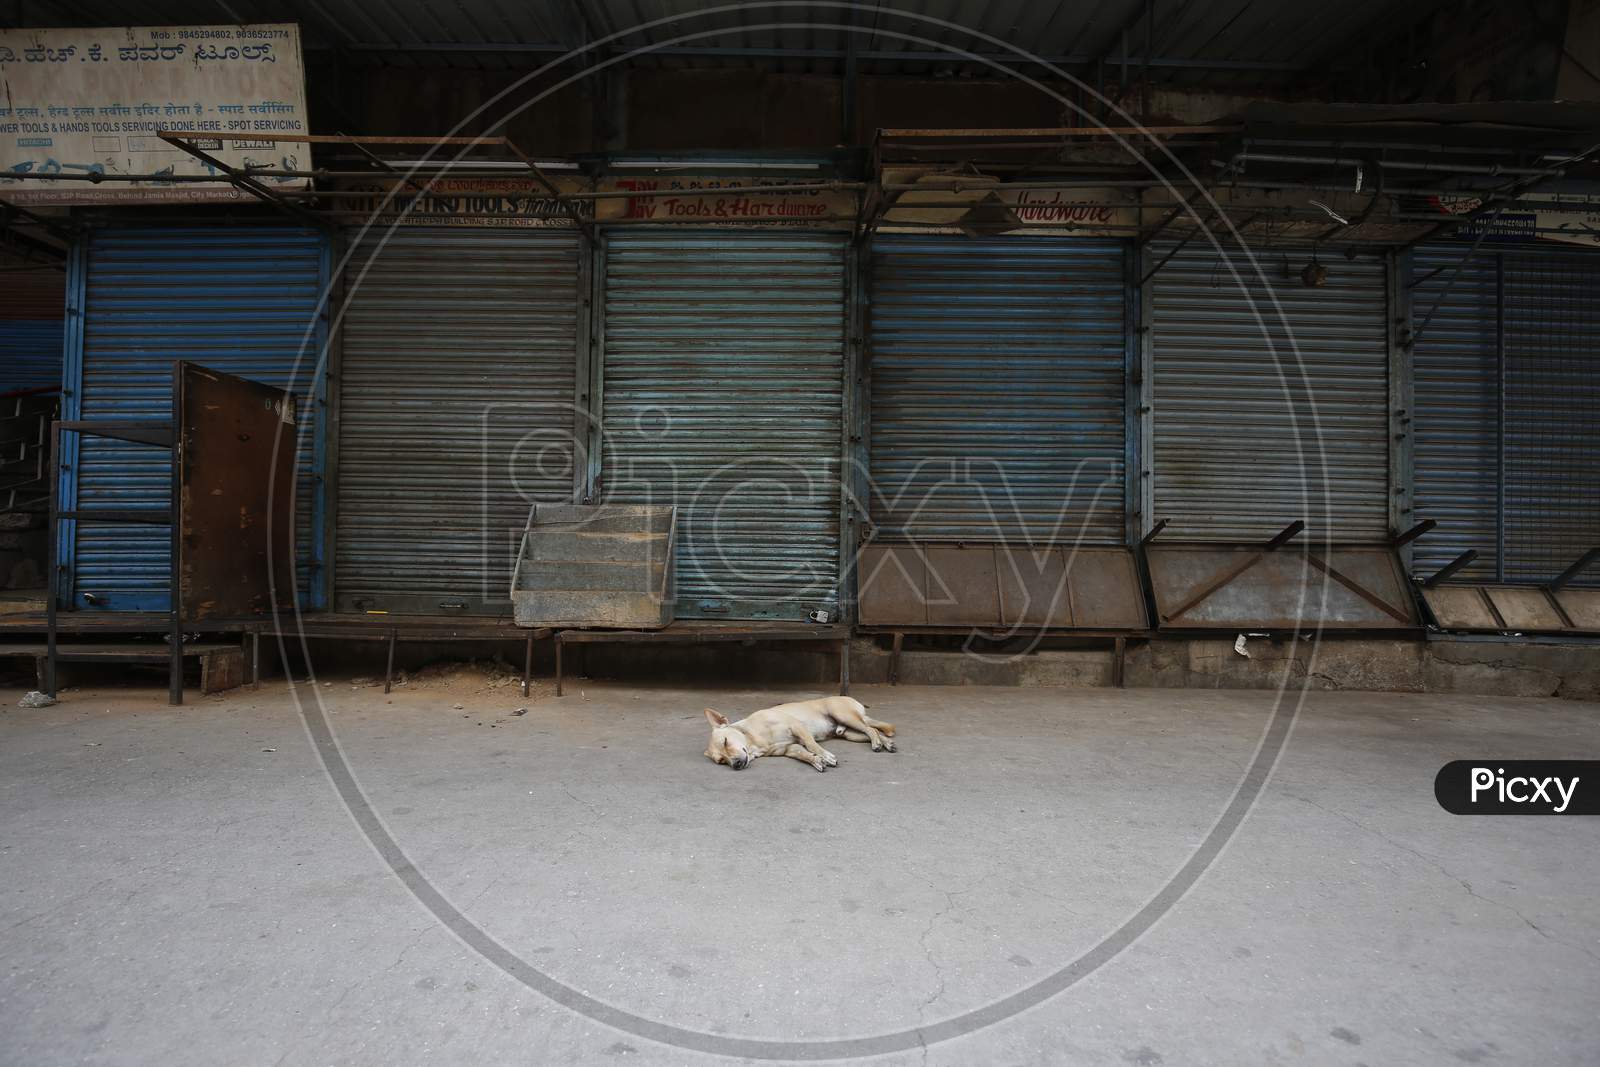 A dog sleeps outside shuttered shops in a market during the nationwide lockdown to stop the spread of Coronavirus (COVID-19) in Bangalore, India, May 01, 2020.